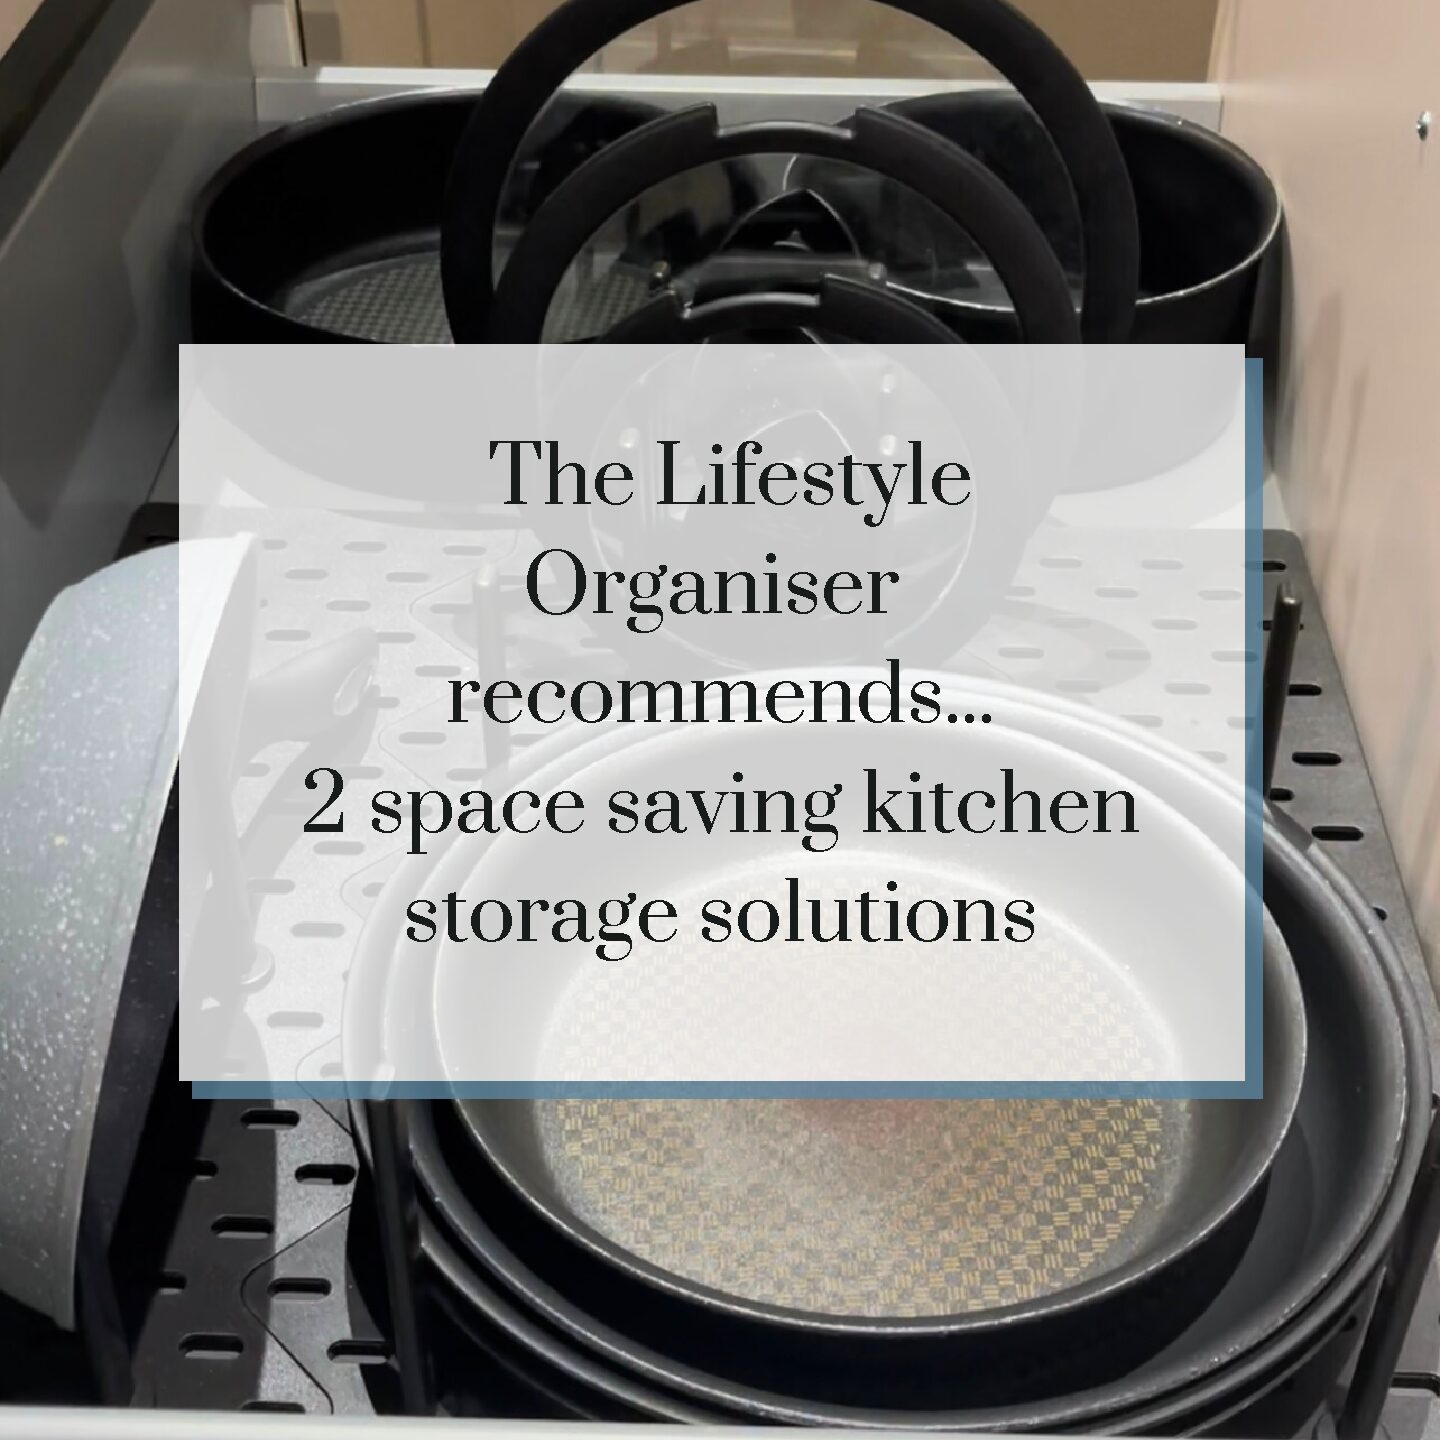 The Lifestyle Organiser recommends 2 space saving kitchen storage solutions